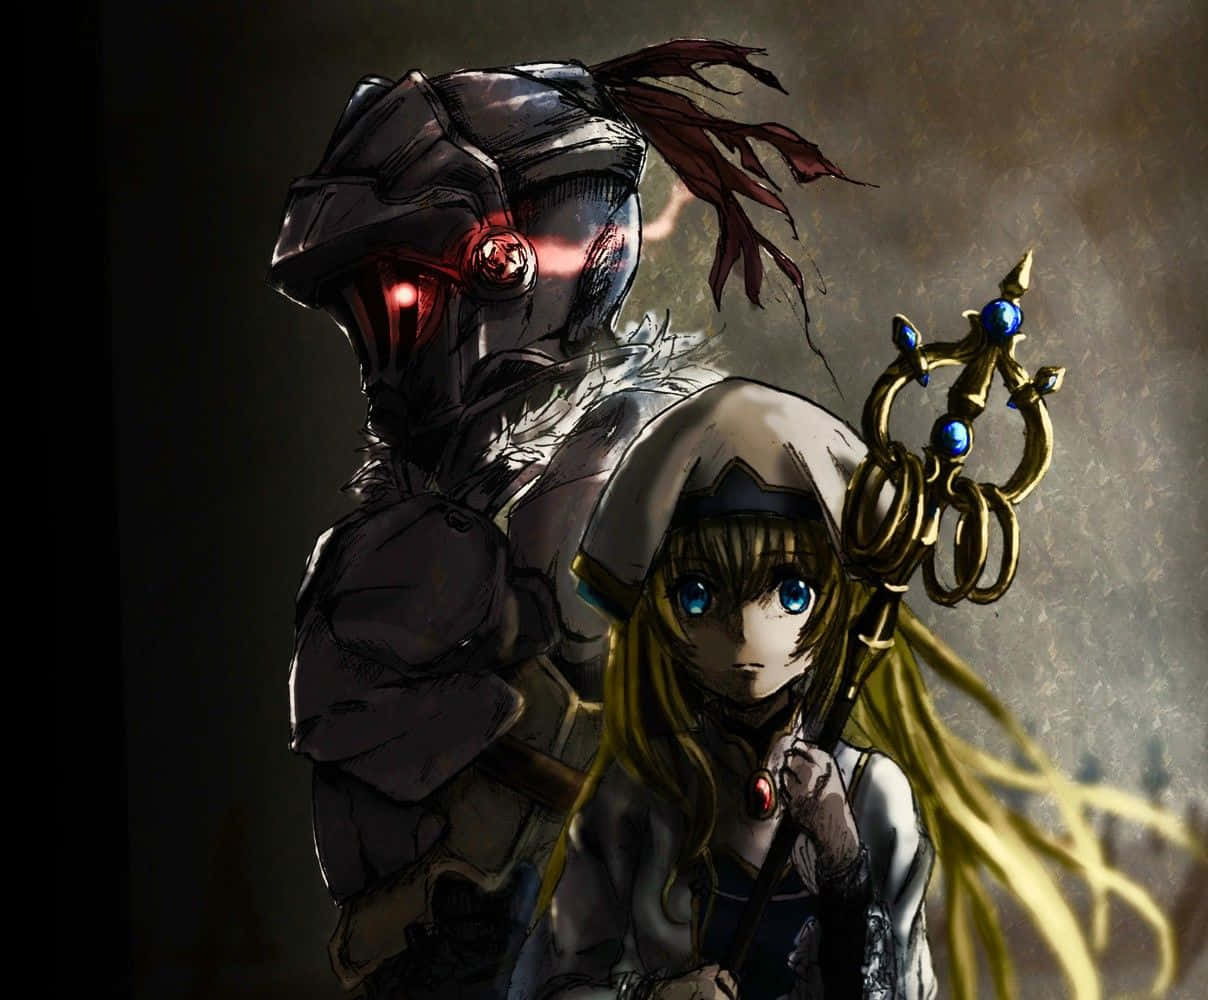 Goblin Slayer, Ready to Serve Justice